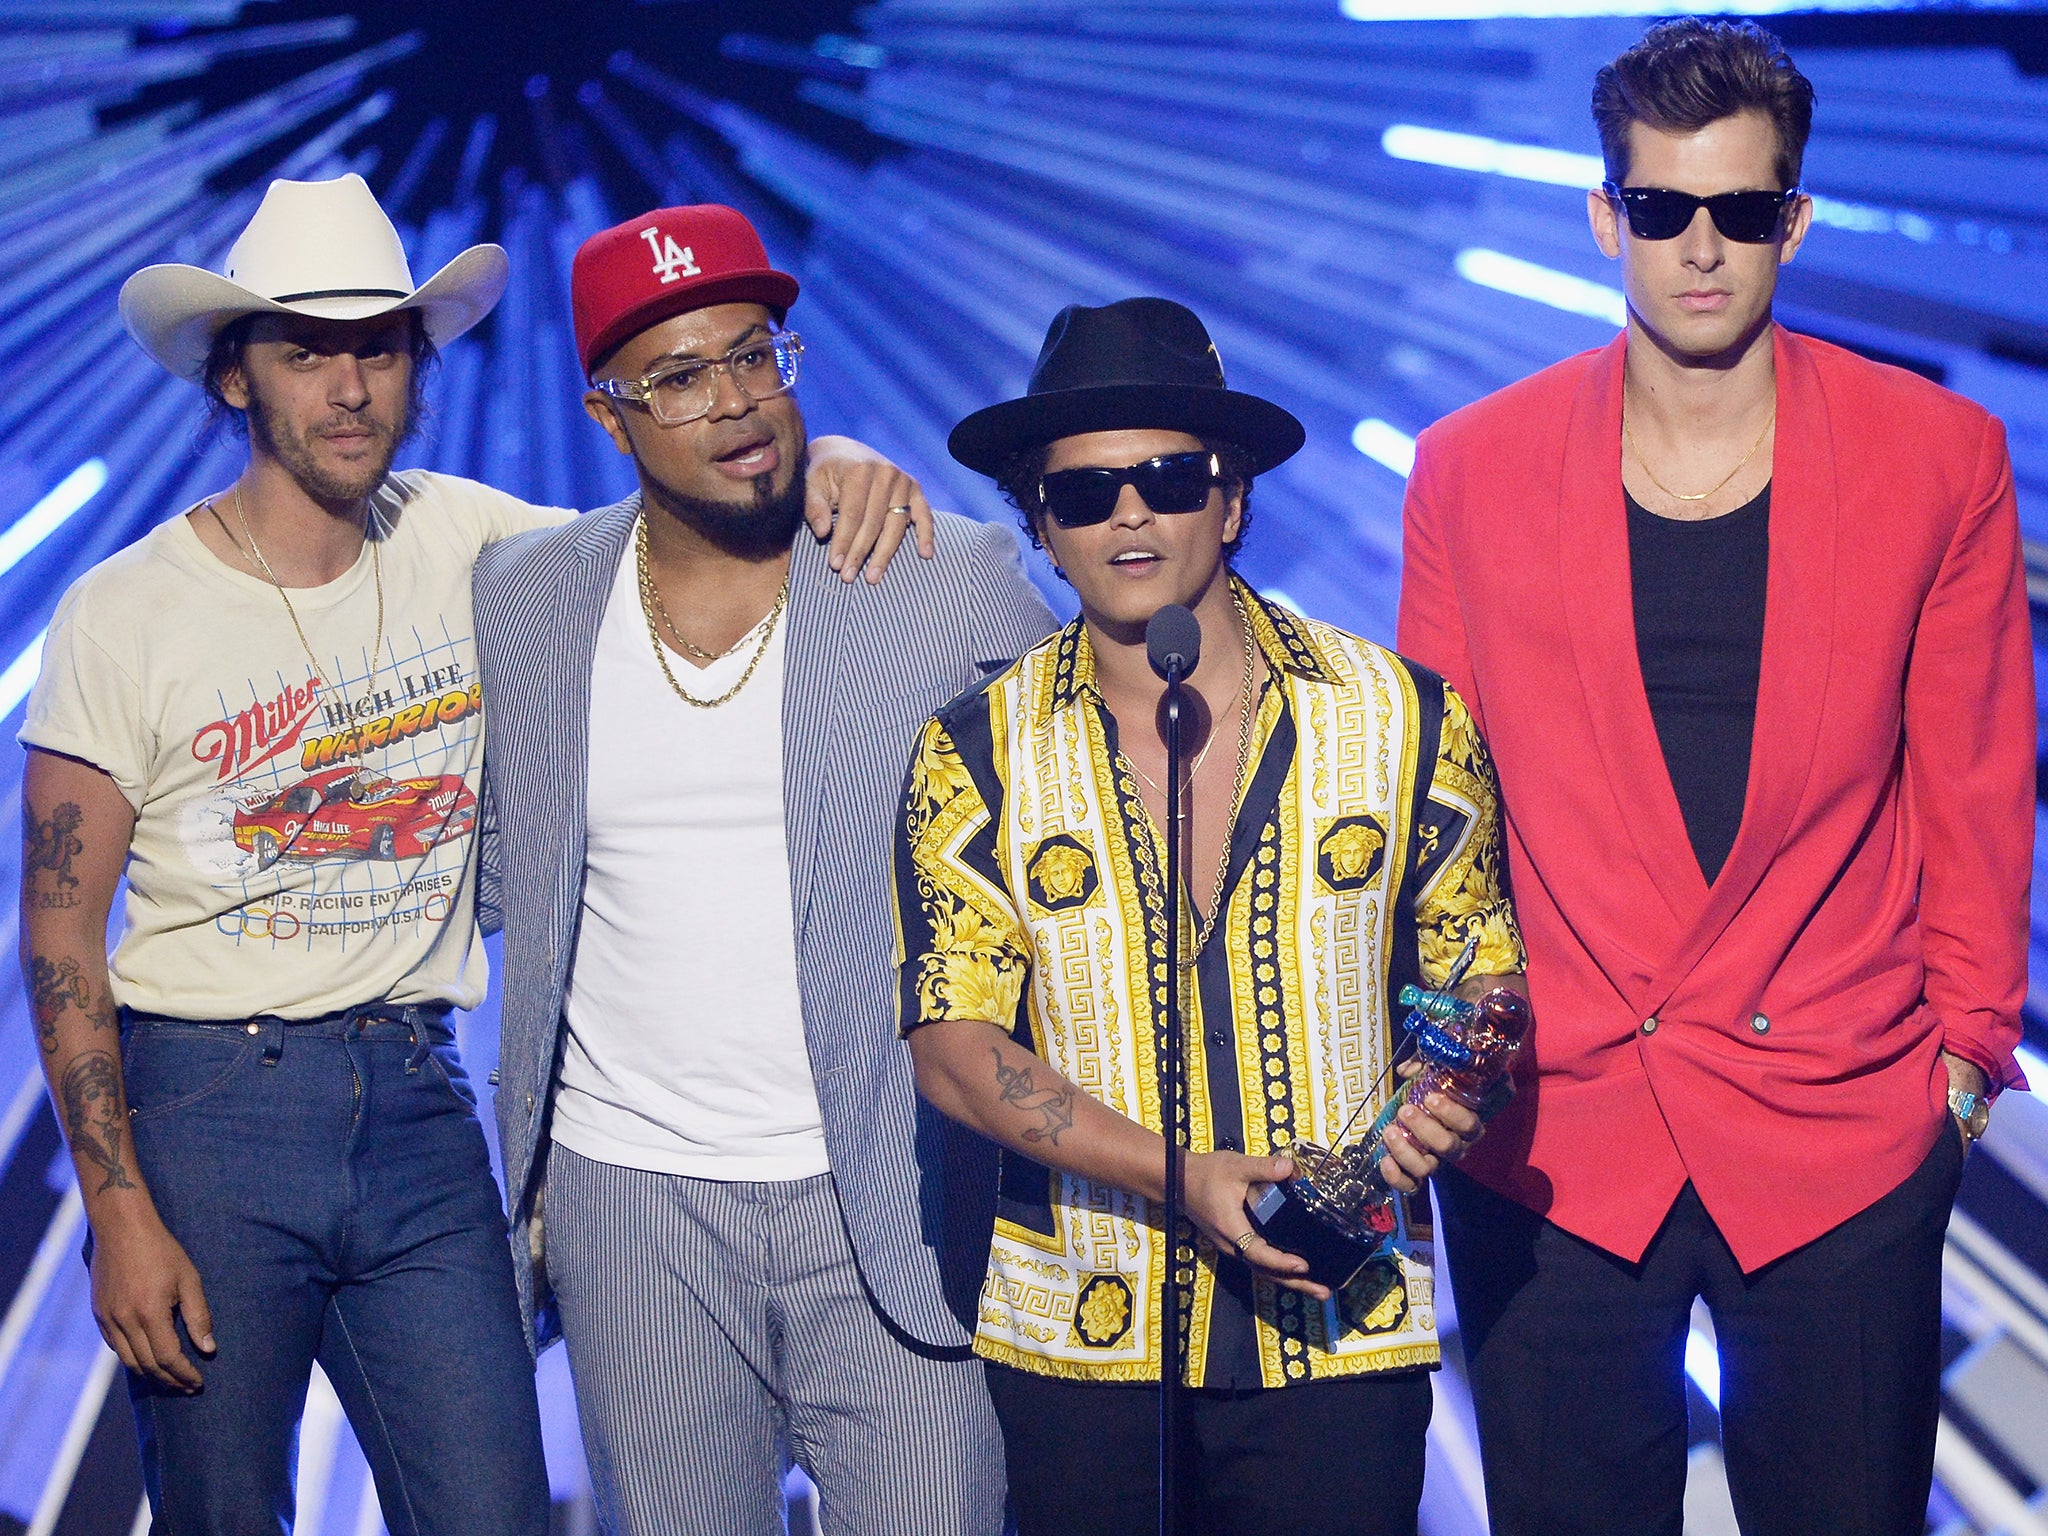 Uptown Funk, by Mark Ronson (right) now has 11 credited songwriters after artists demonstrated that the hit incorporated samples from them